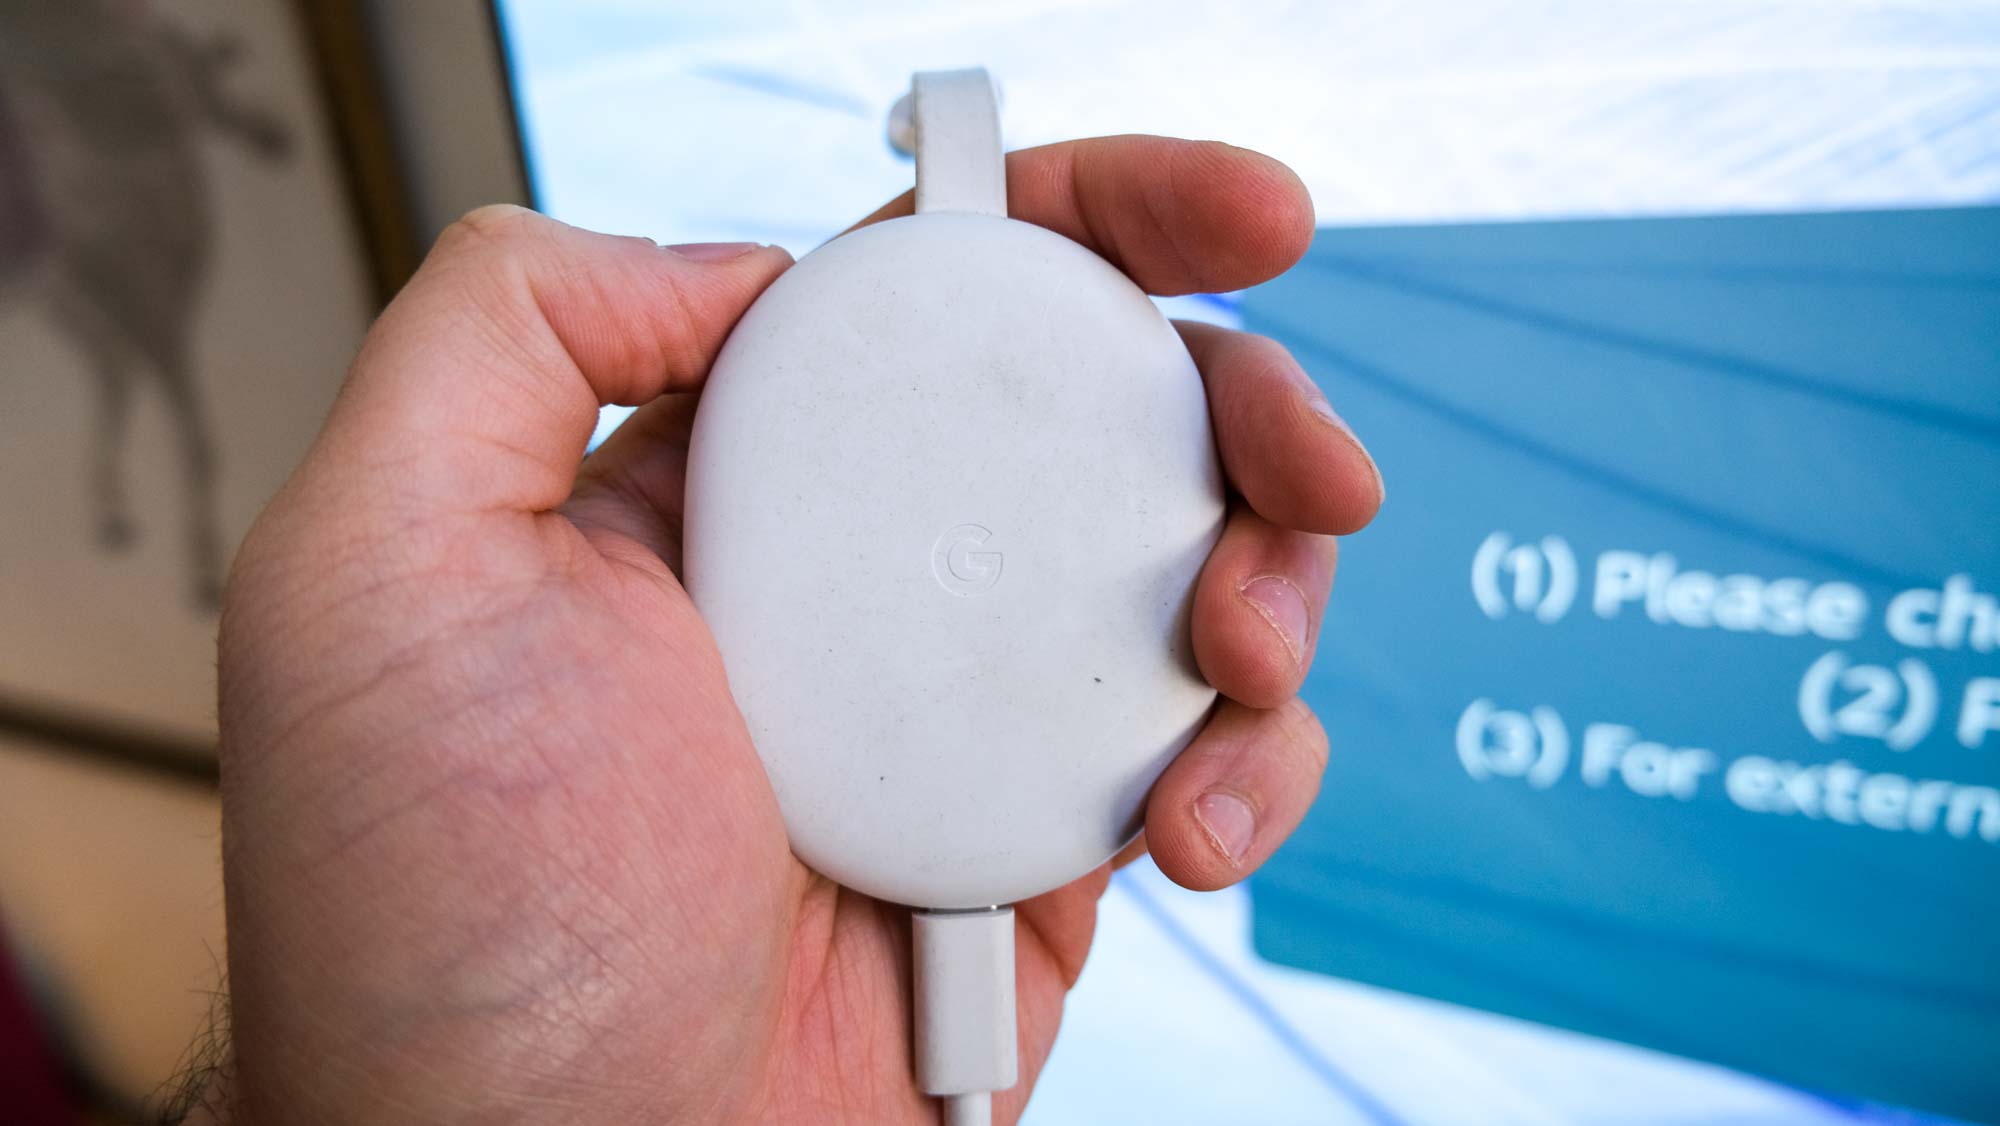 The Chromecast with Google TV in hand